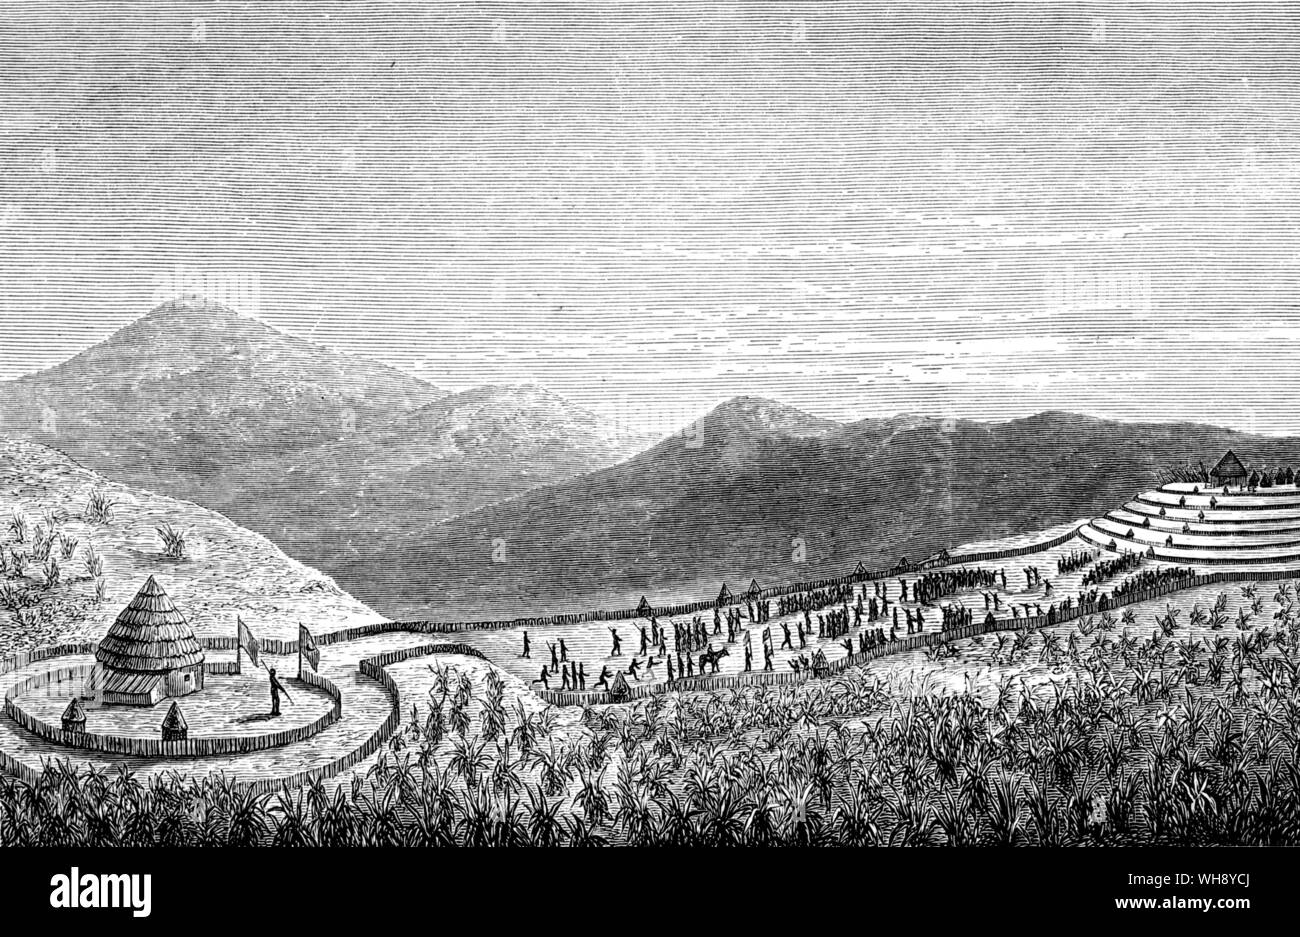 Rubanga, Mutesa'a new capital: '...situated in the centre of an amphitheatre formed by seven high walls or palisades through which entrance is had by opposing gates to which cow bells are attached.' (Chaille-Long) From a sketch by Chaille-Long. Stock Photo